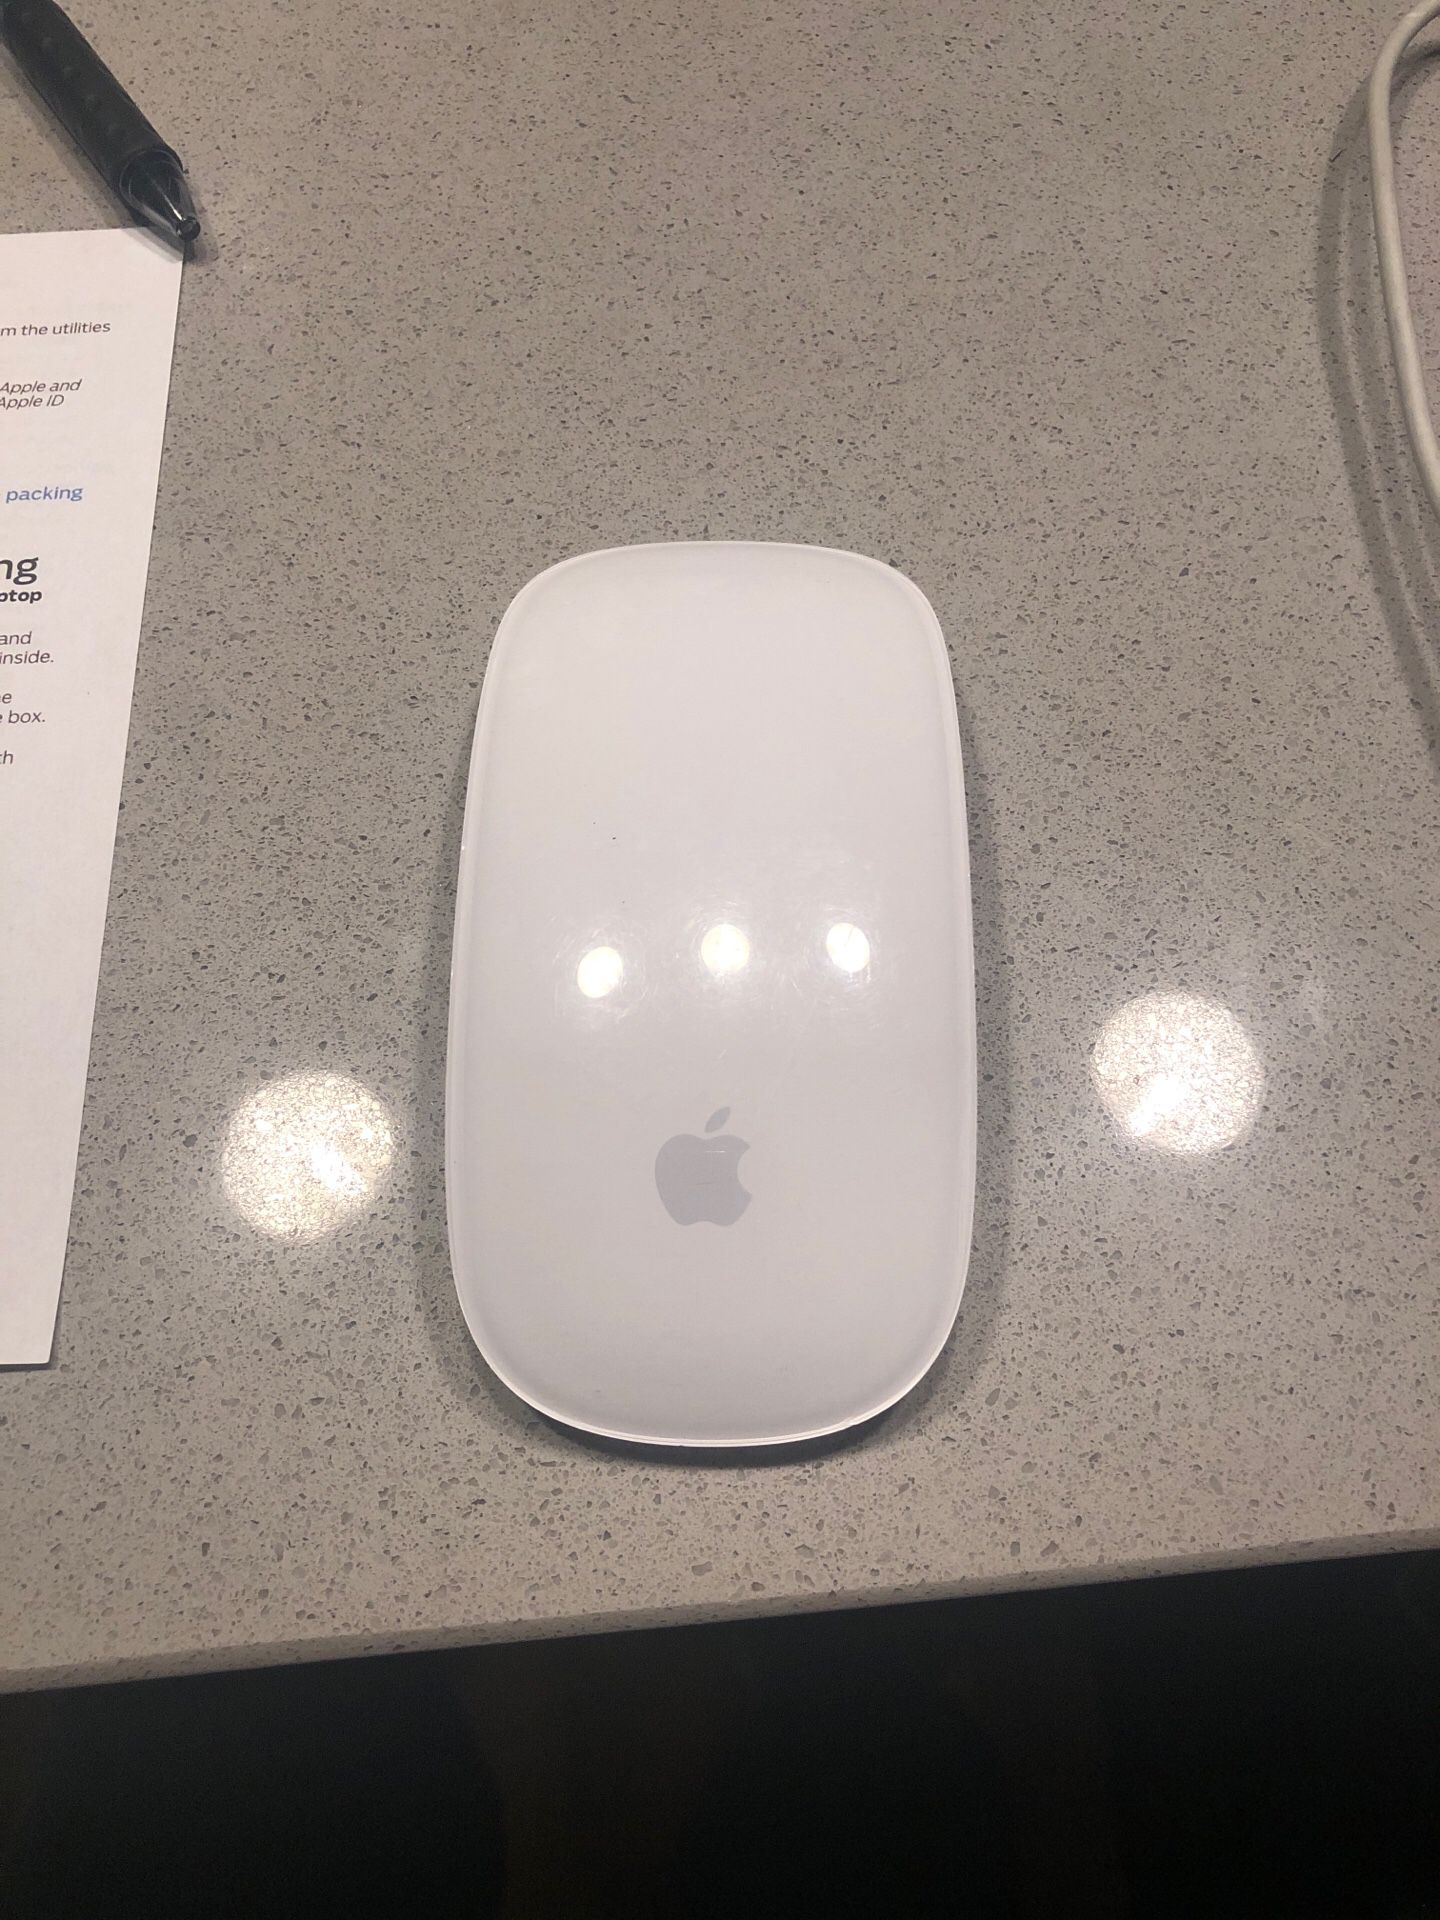 Apple mouse wireless Bluetooth